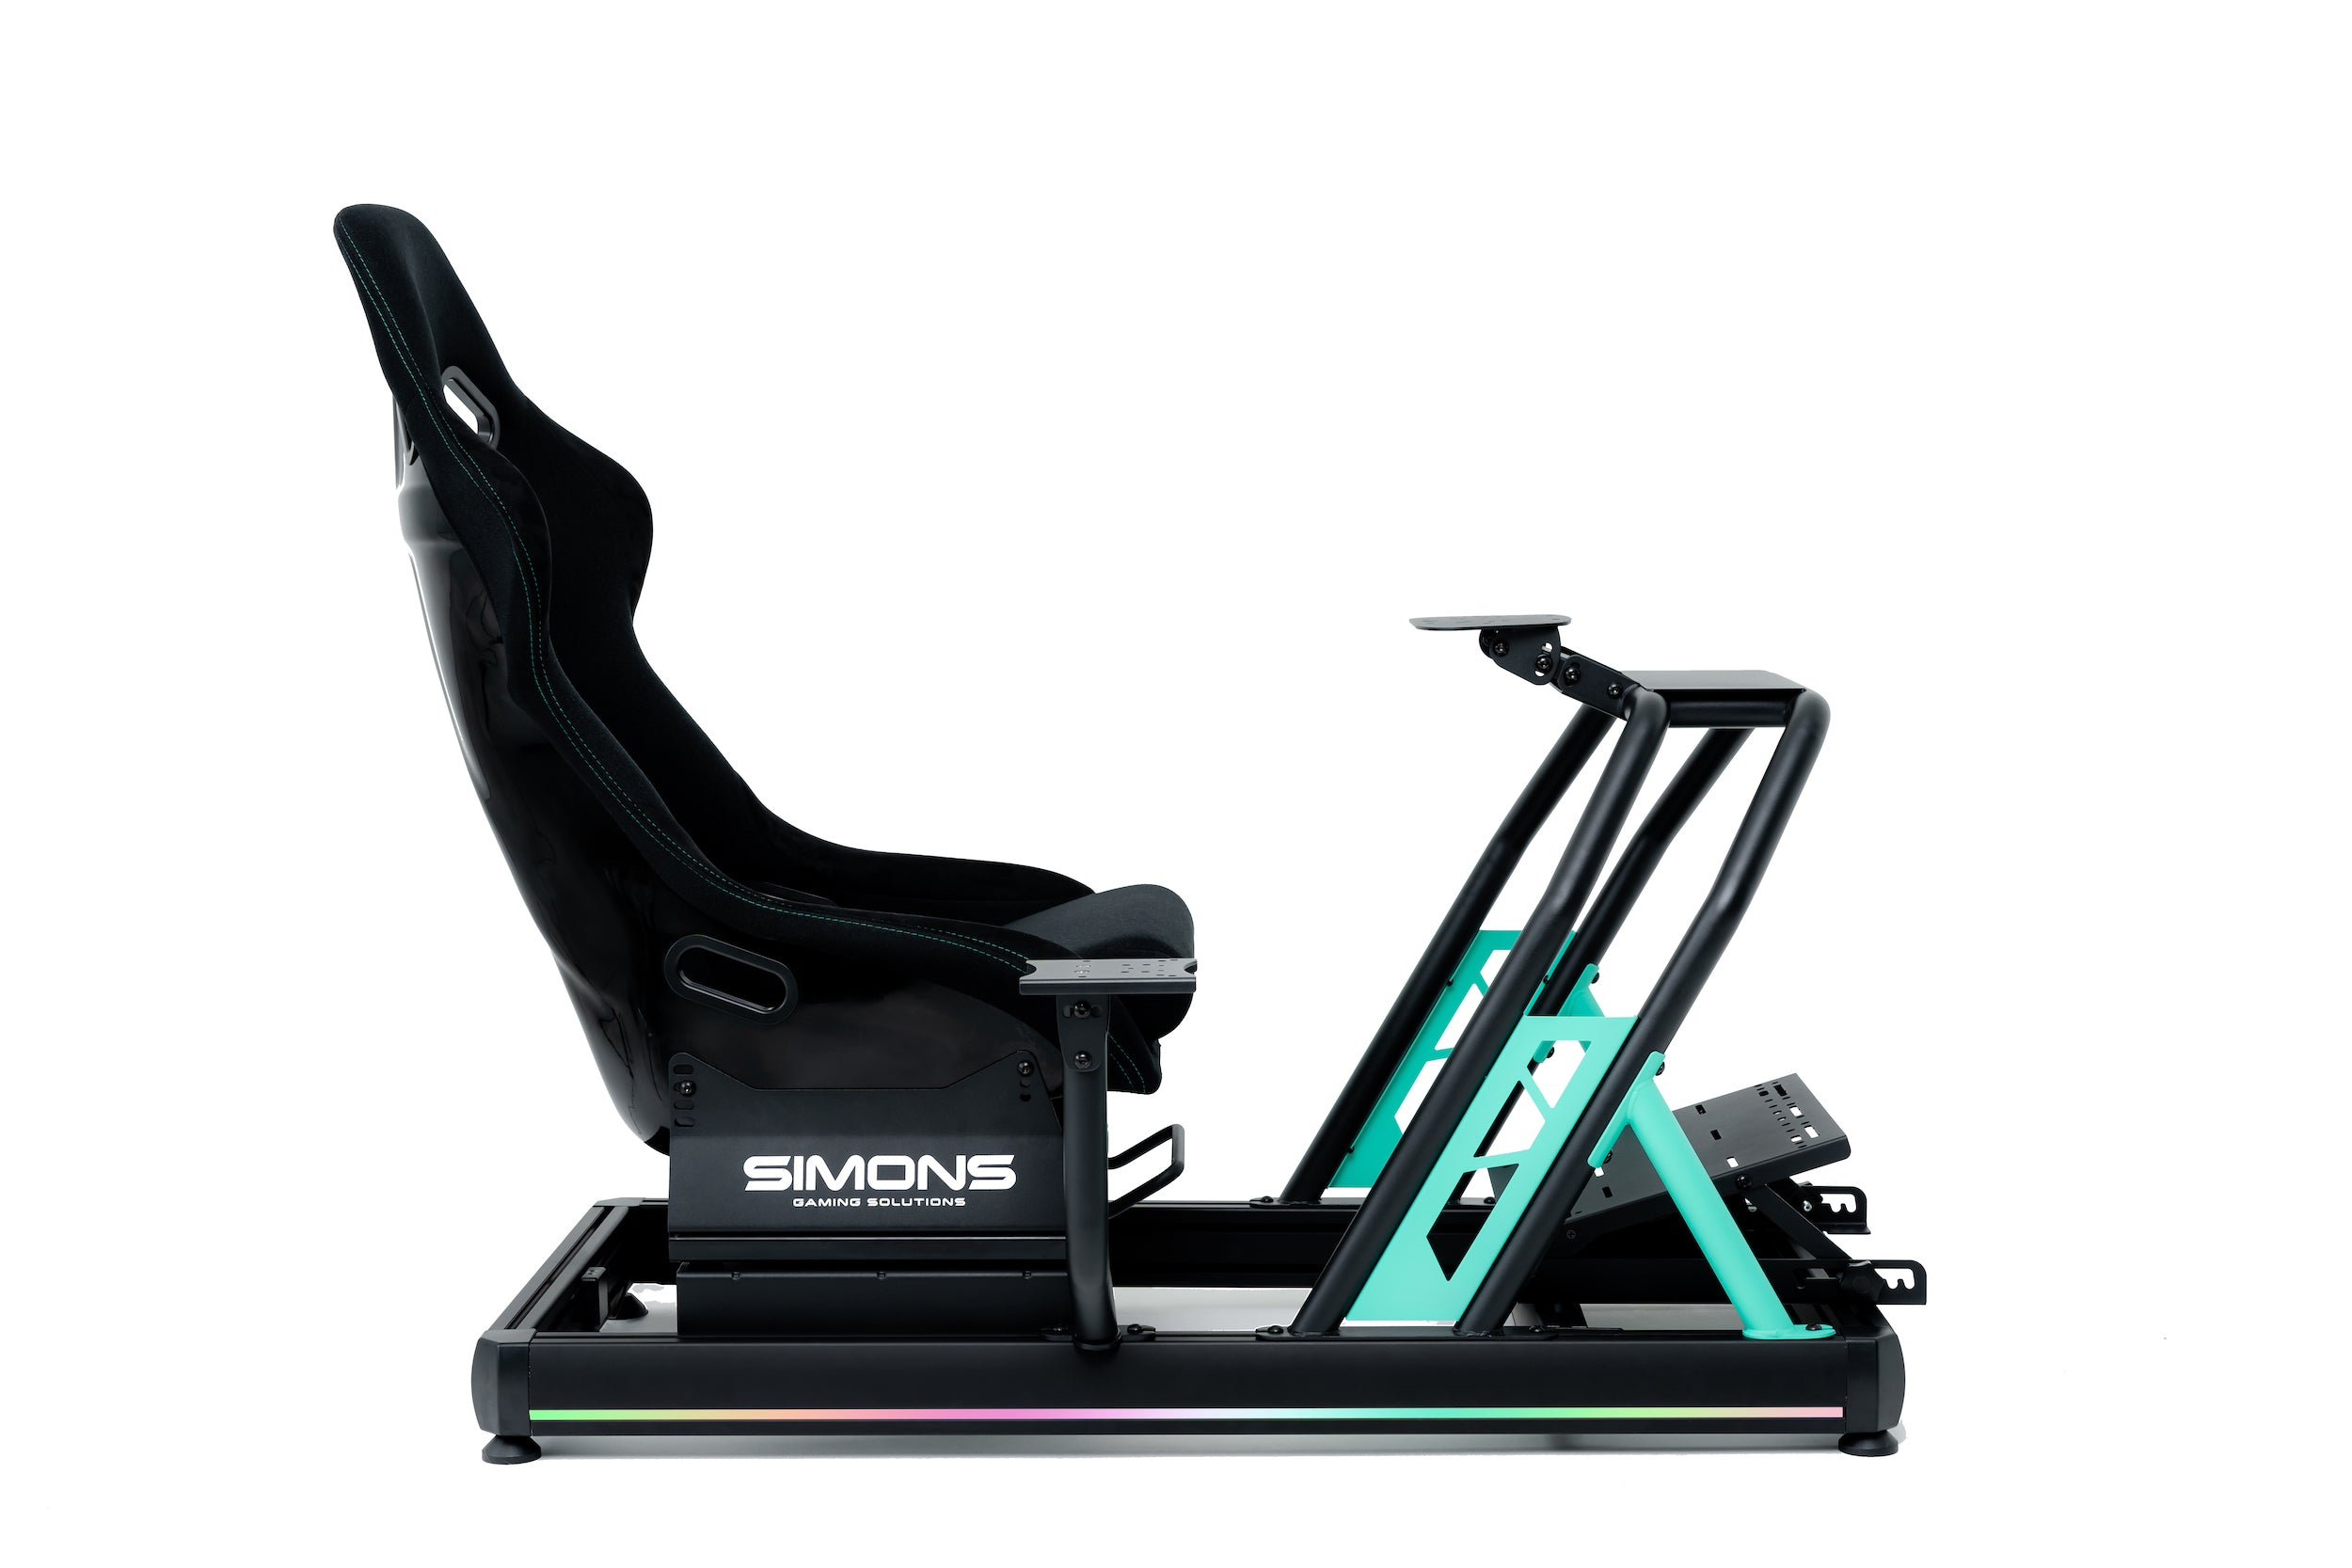 The 5 Most Important Things to Look Out for When Buying a Sim Racing Cockpit